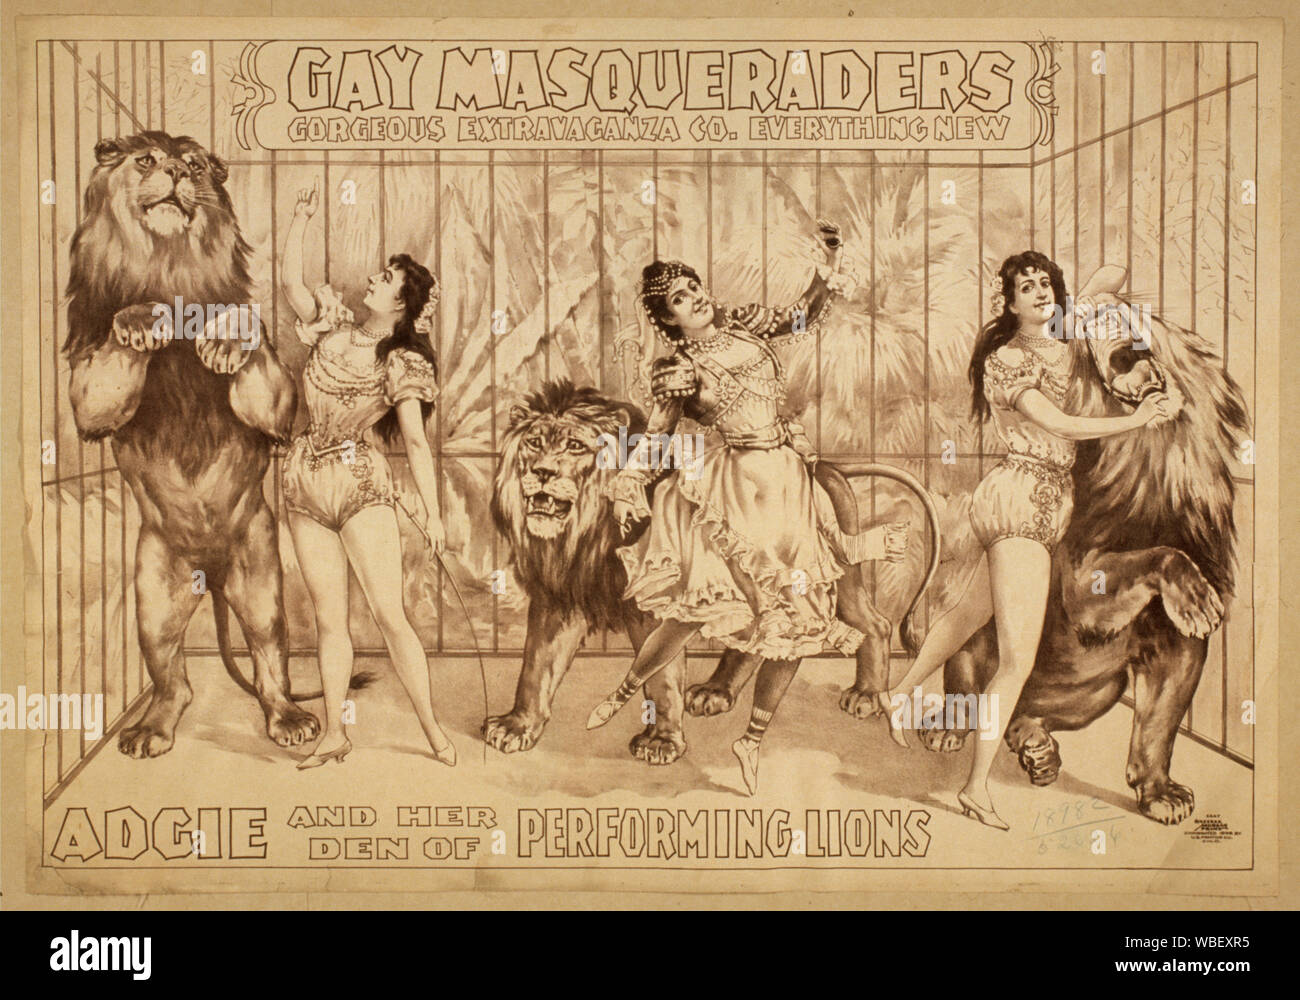 Gay Masqueraders Gorgeous Extravaganza Co. everything new. Abstract/medium: 1 print : black and white lithograph ; sheet 74 x 105 cm. (poster format) Stock Photo